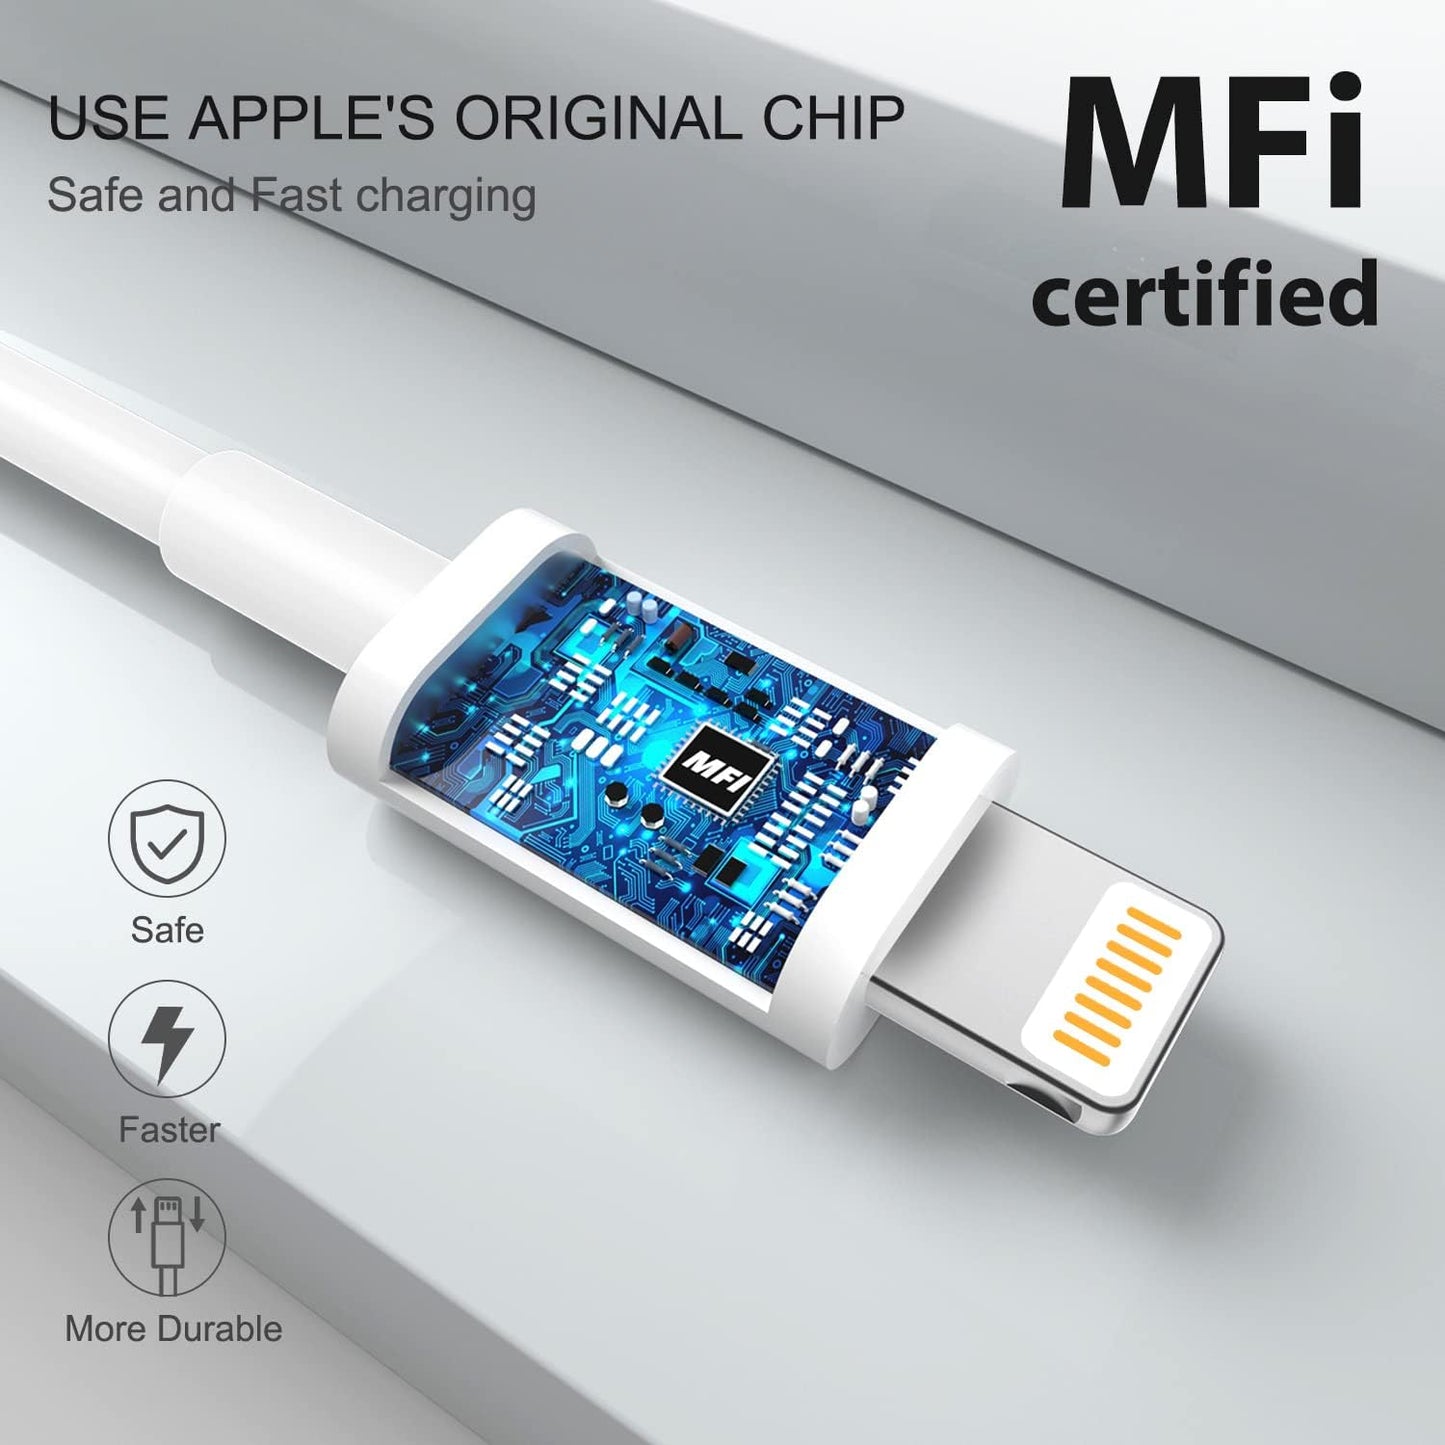 4-Pack[Apple MFi Certified] iPhone Charger Cord 6ft Long,USB to Lightning Cable,Apple USB 2.4A Fast Charging Cord for iPhone 14/13/12/11 Pro/11/XS MAX/XR/8/7/6s Plus,iPad Pro/Air/Mini,iPod Touch